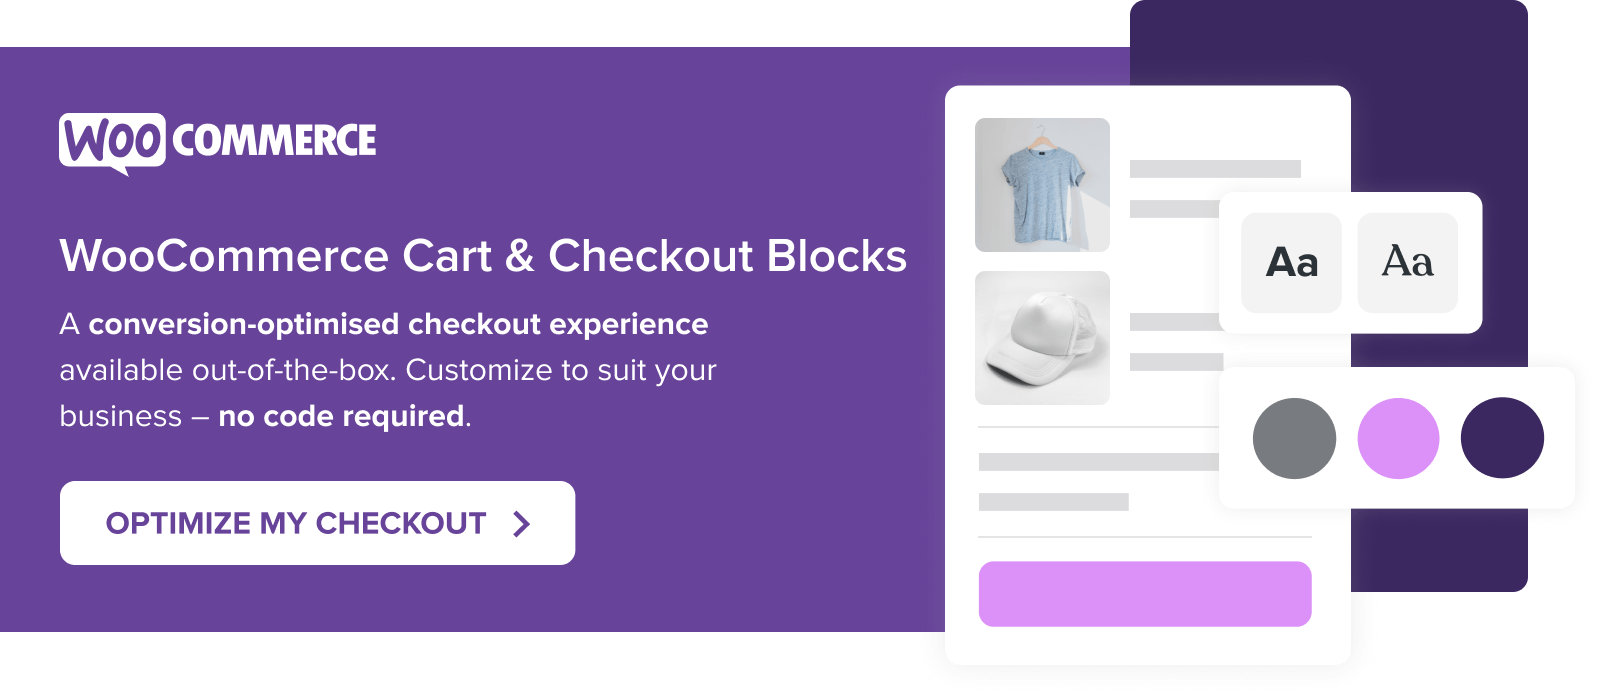 Optimize your checkout with WooCommerce Cart & Checkout Blocks